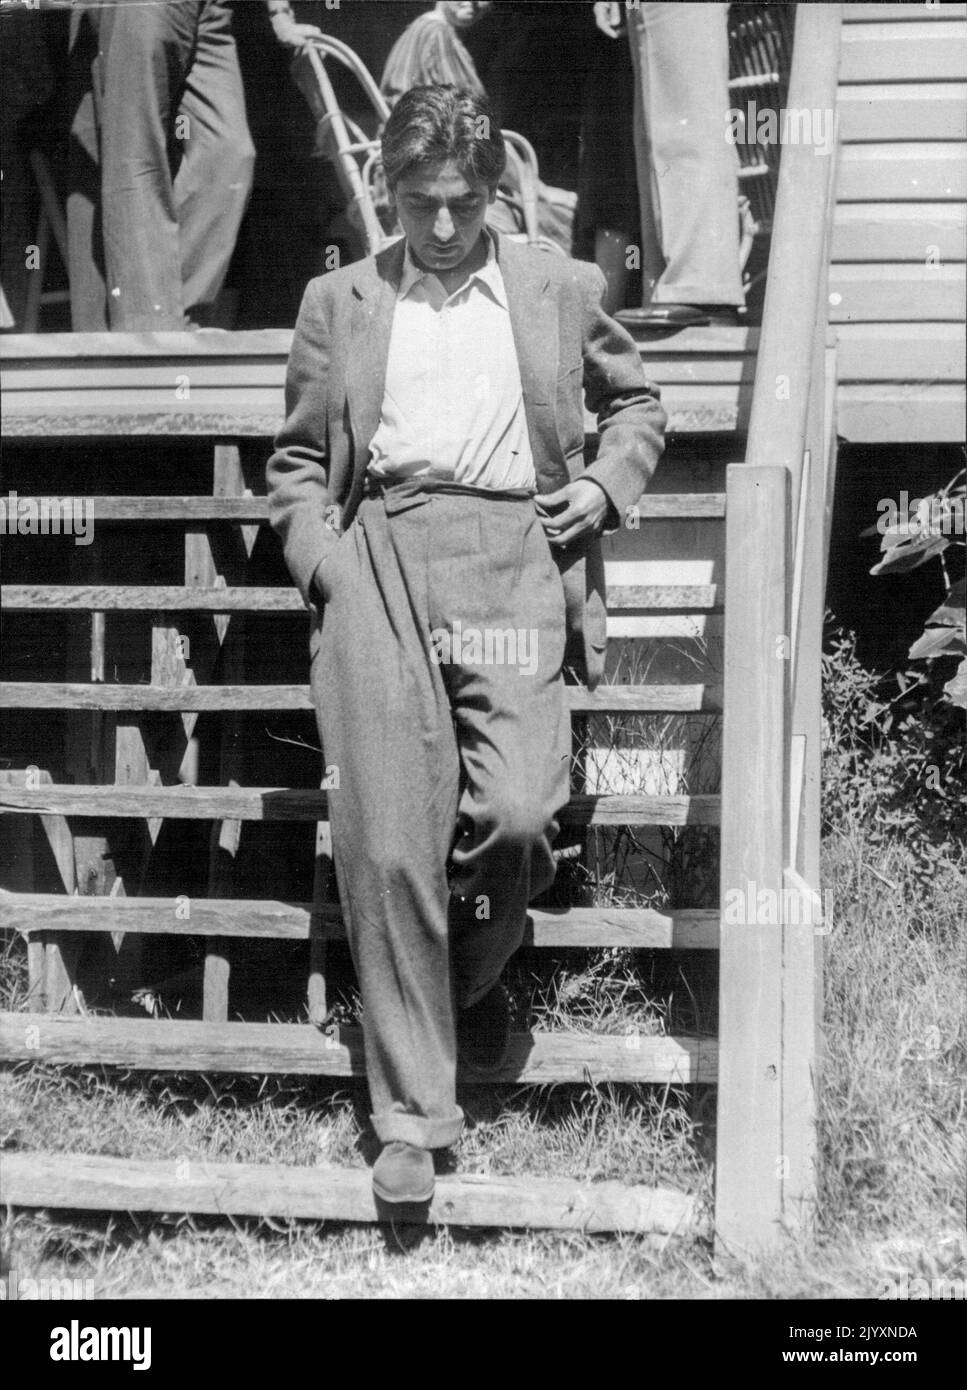 Krishnamurti - Pensively, Krishnamurti walks down steps after hour's session writer gathering a Workers' Ed. Ass. members at Newport (N.S.W.) Krishnamurti travelled from Sydney by taxi Wendsday for a week to conduct personal discussions on life members holidaying at Newport at conclusion of wing parley, Krishnamurti immediately left building, Strolled alone in roadway until taxi party ready to leave for city. March 08, 1947. Stock Photo